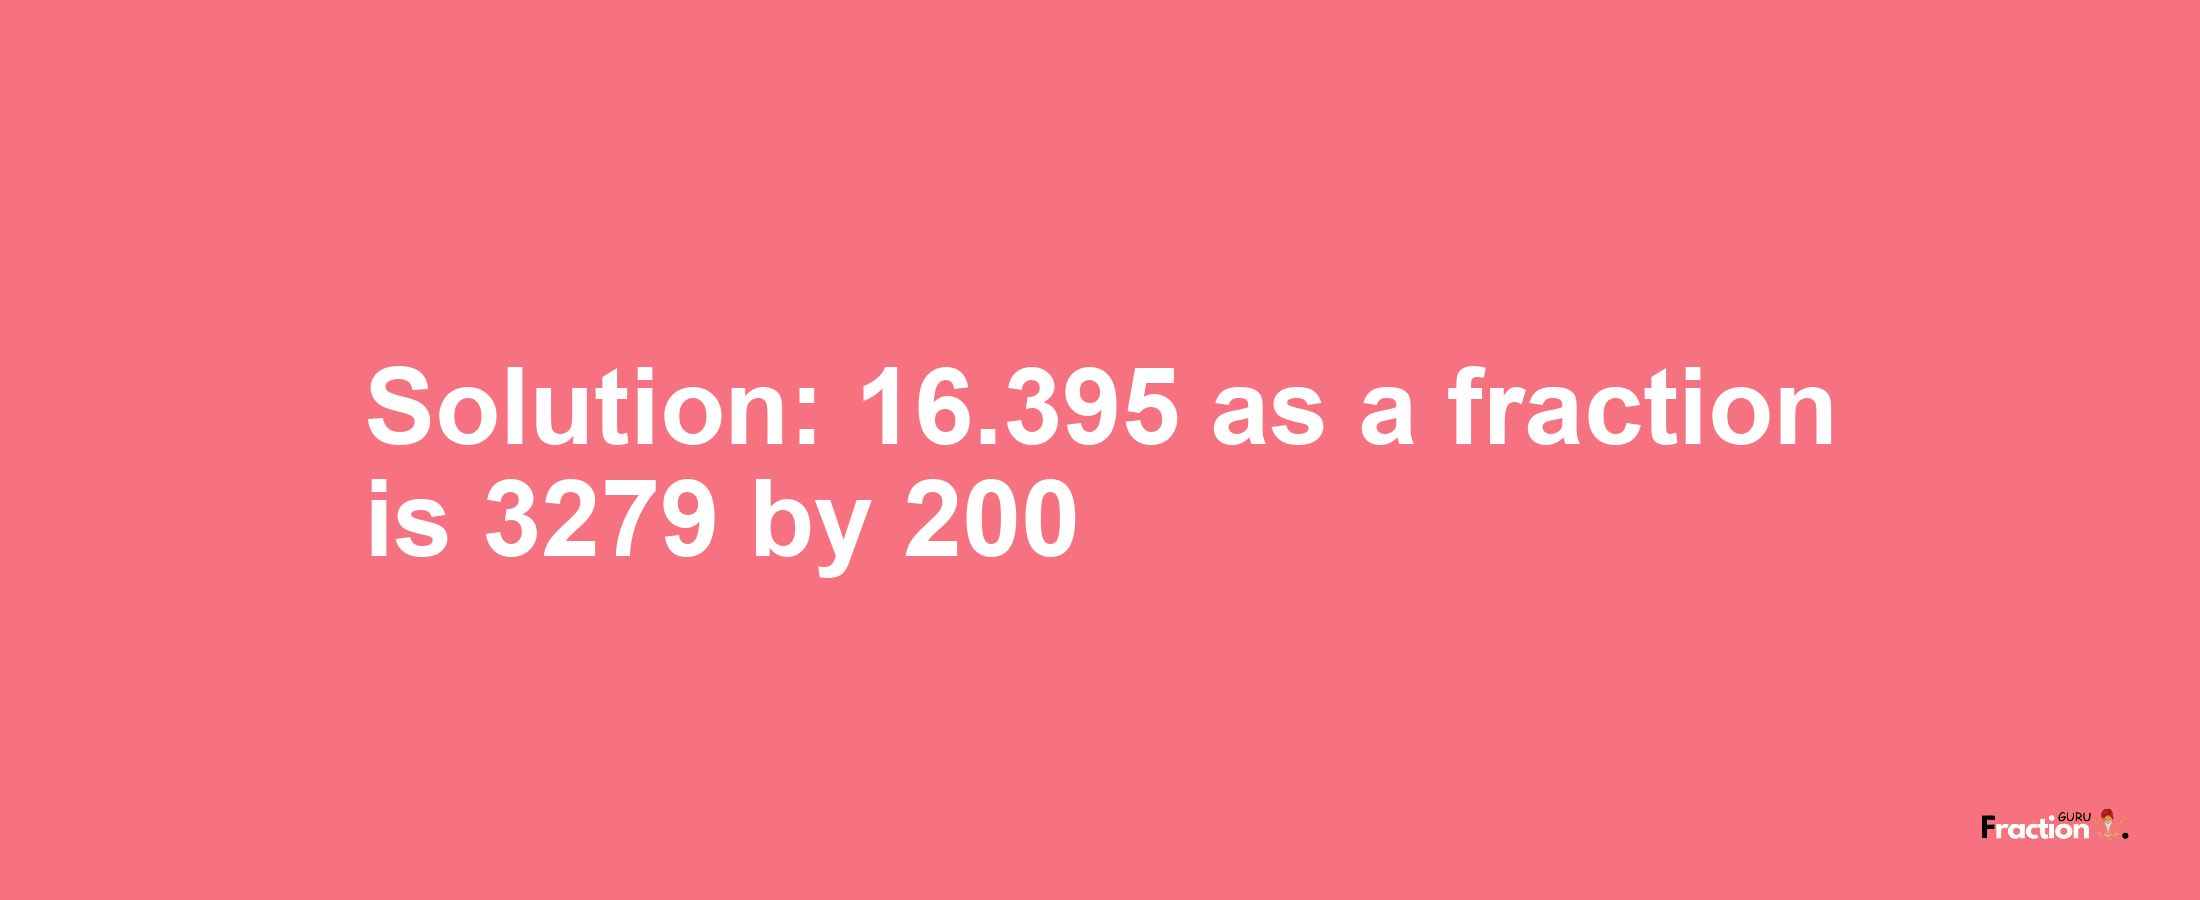 Solution:16.395 as a fraction is 3279/200